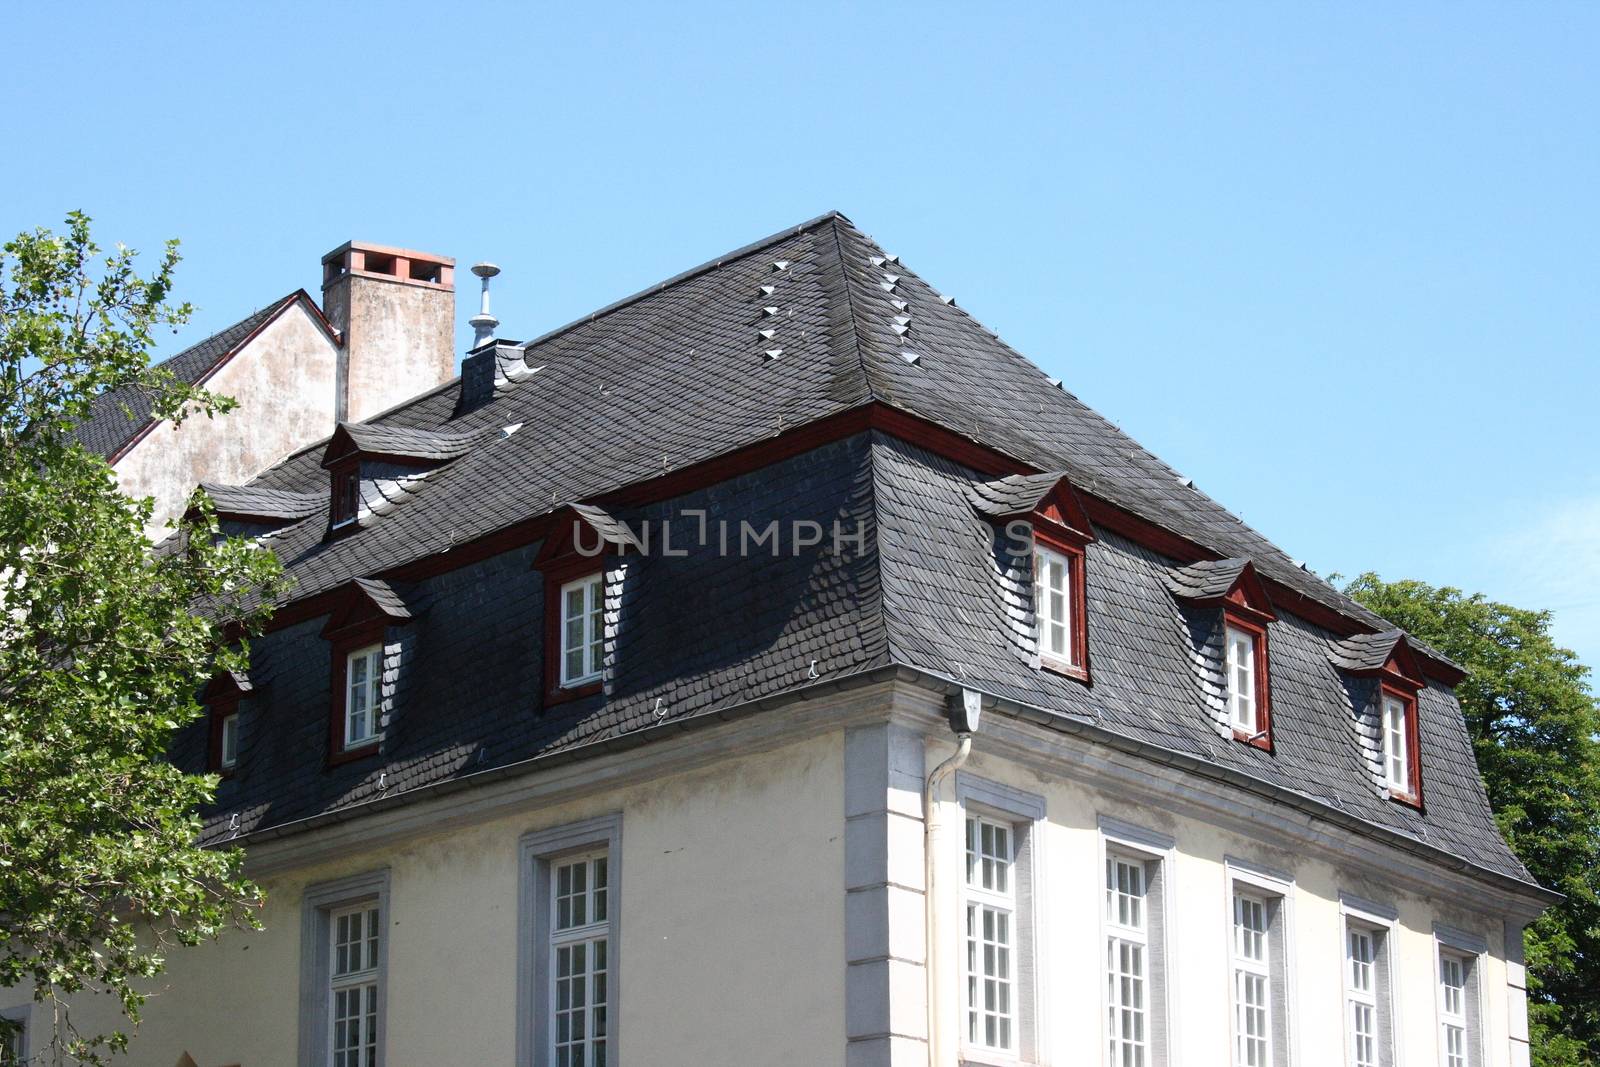 A slate roof with Windows and dormers